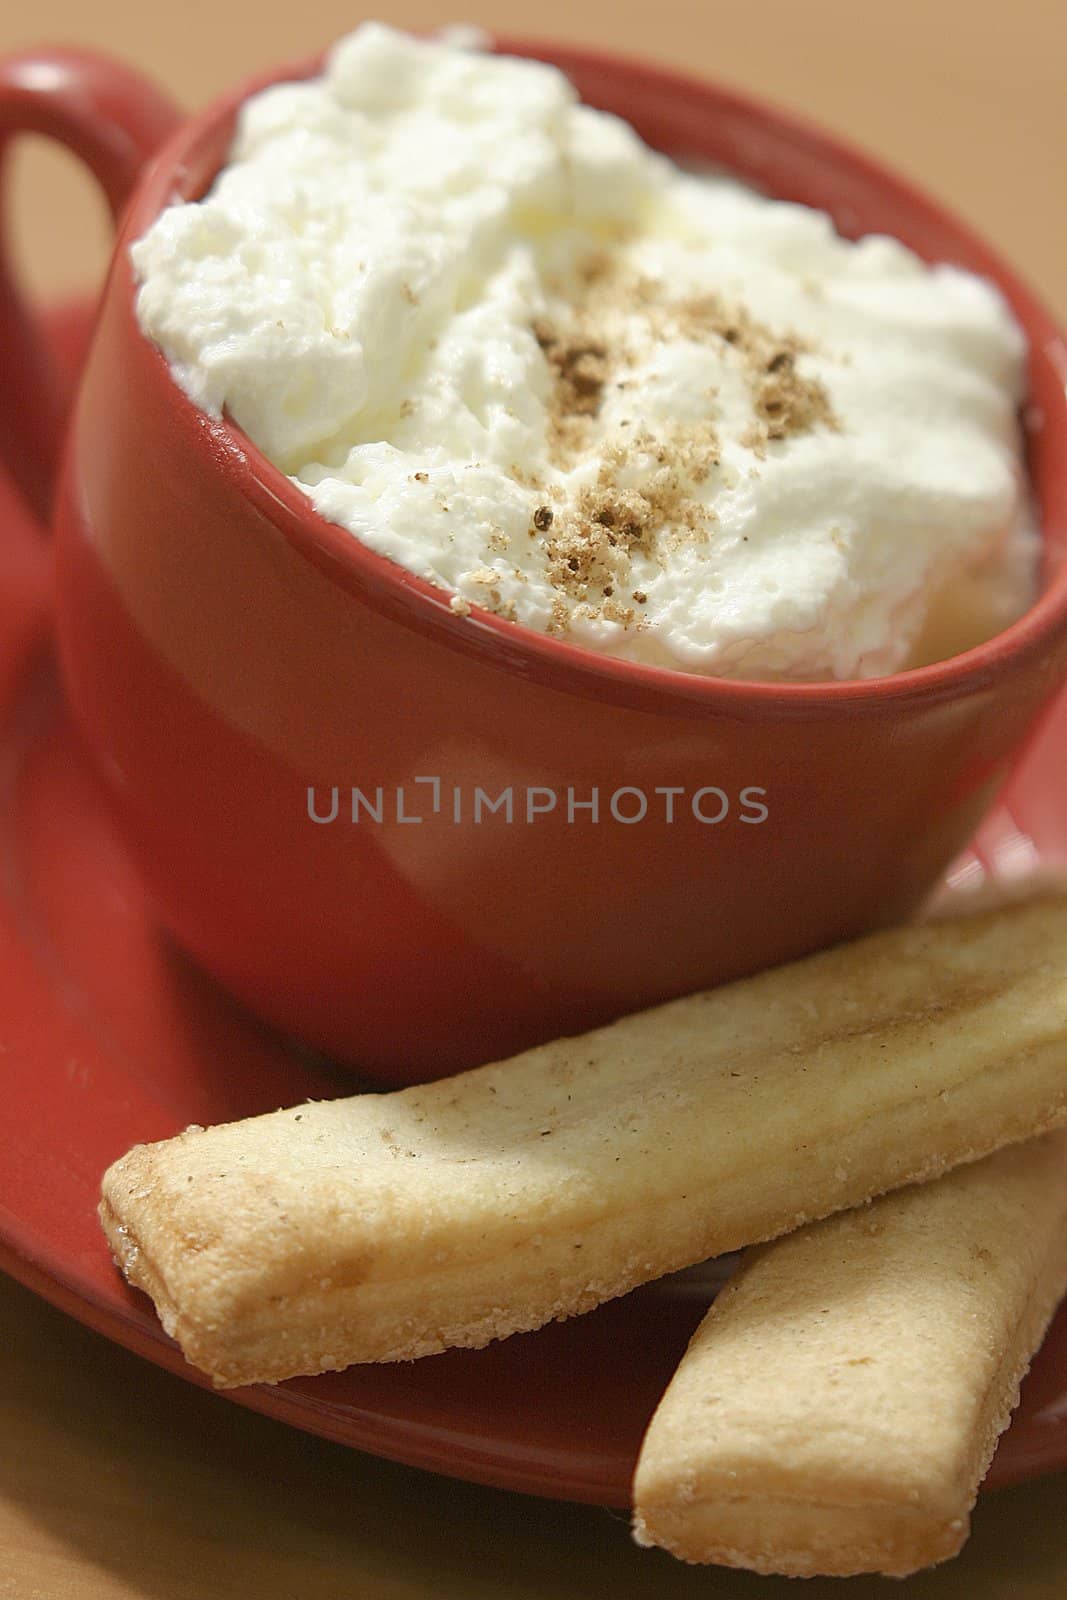 Coffee with whipped cream in a red cup on the saucer and the biscuits